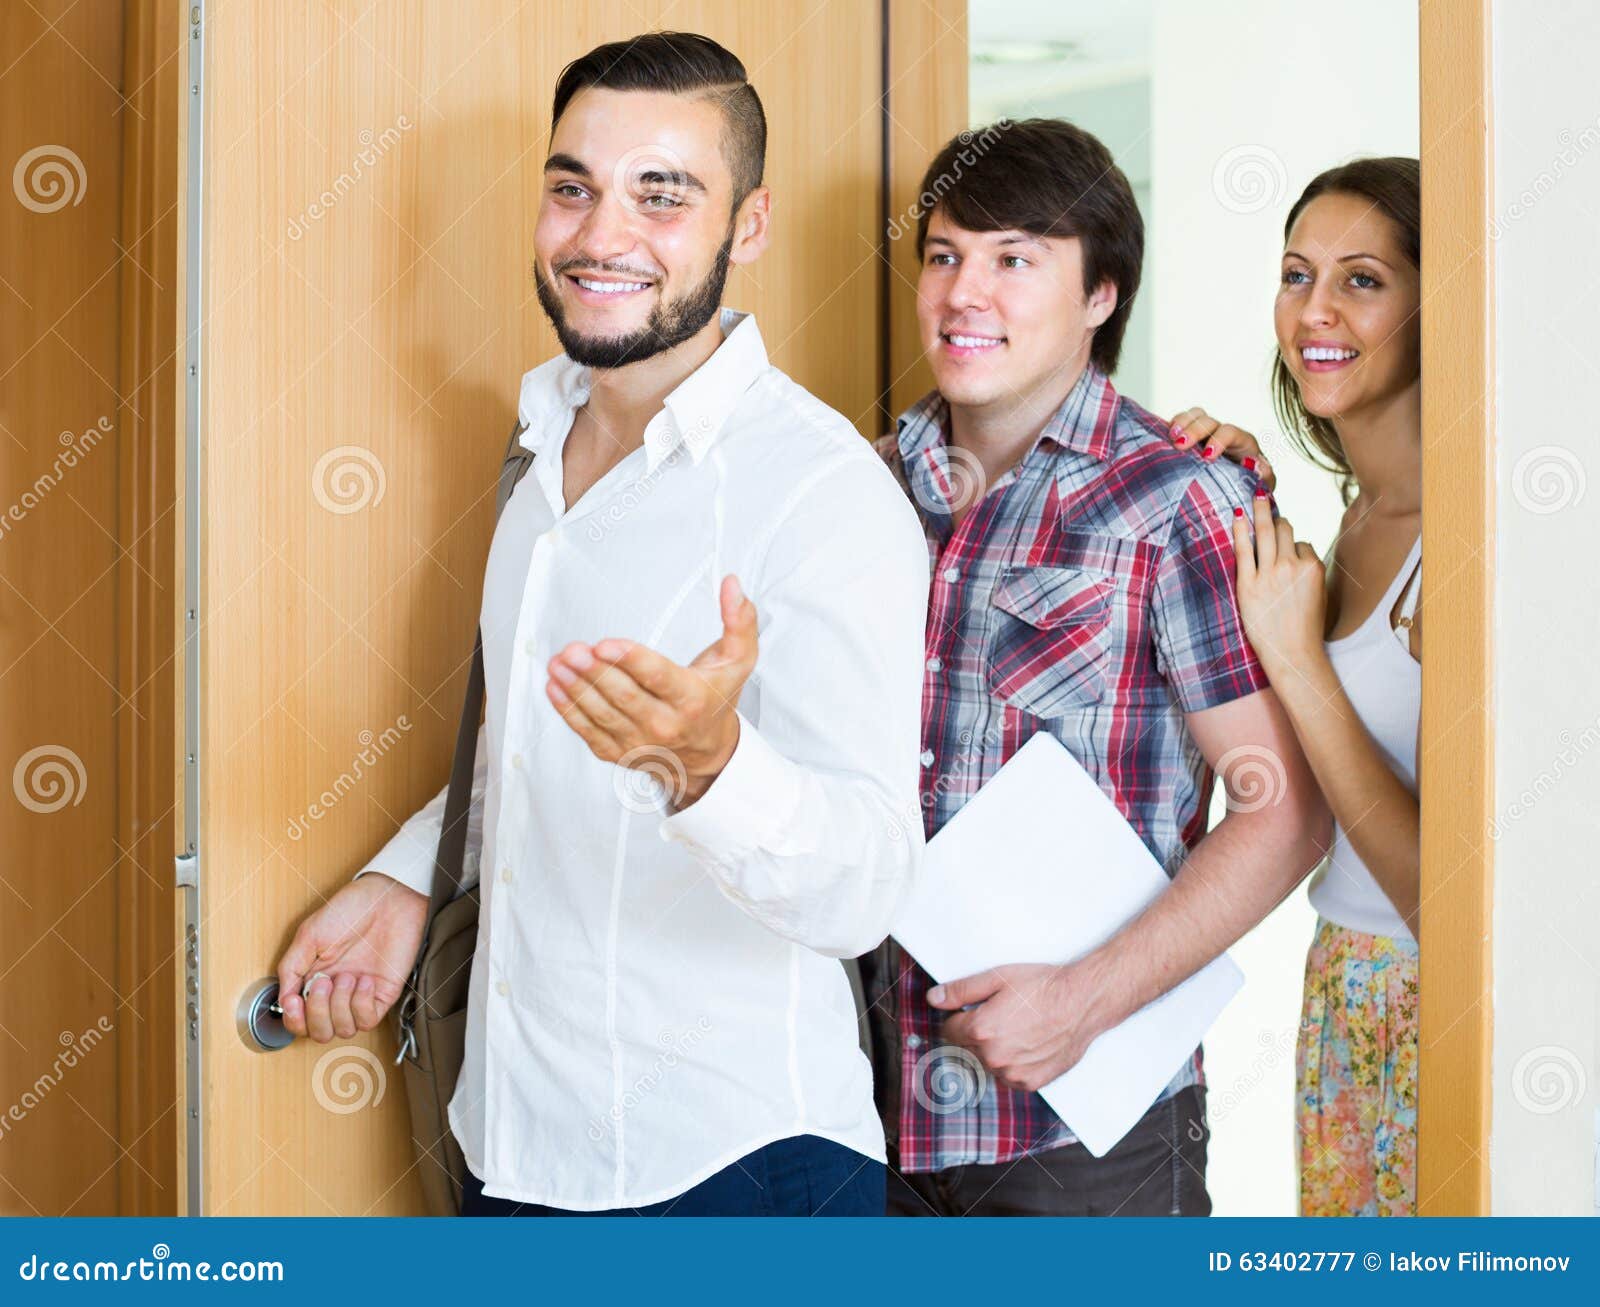 Realtor Showing New Apartment To Couple Stock Image Image Of Doorway 